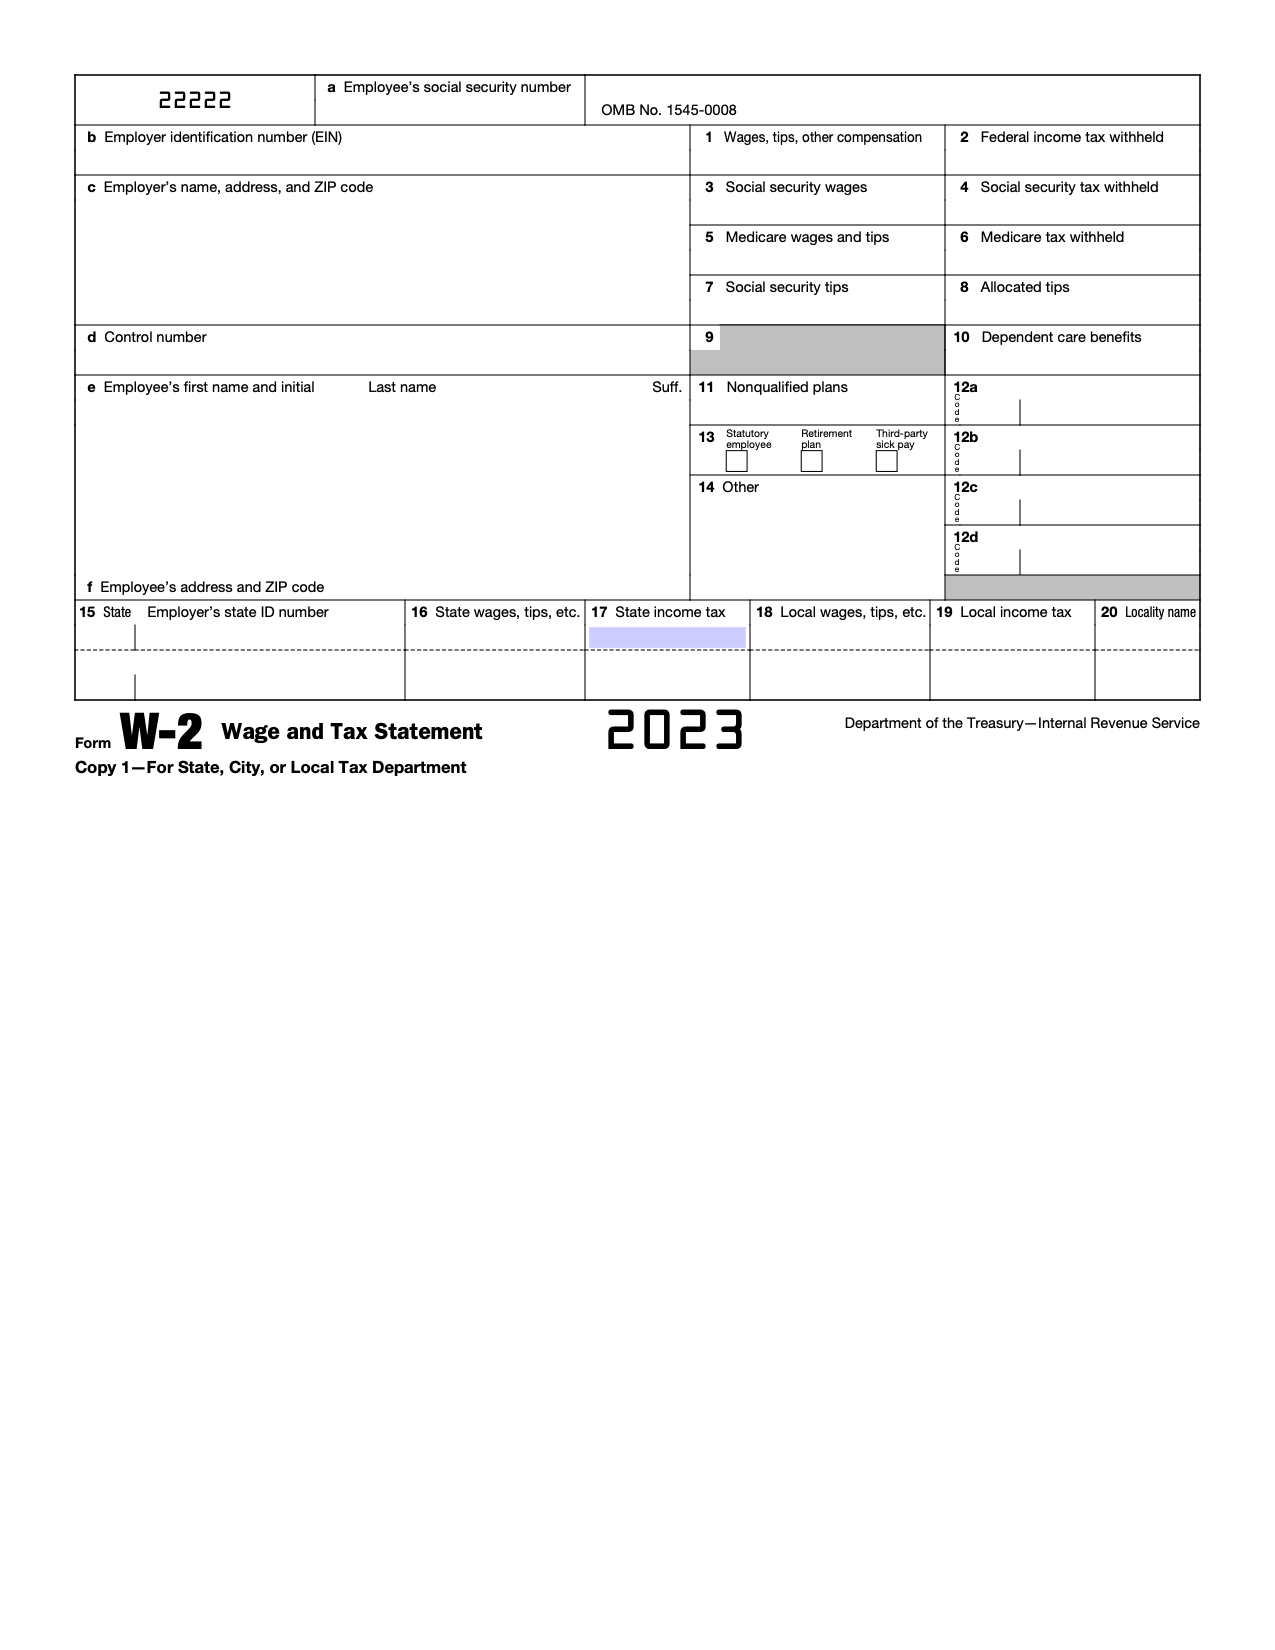 Free Irs Form W-2 | Wage And Tax Statement - Pdf – Eforms within W2 Form 2023 Printable